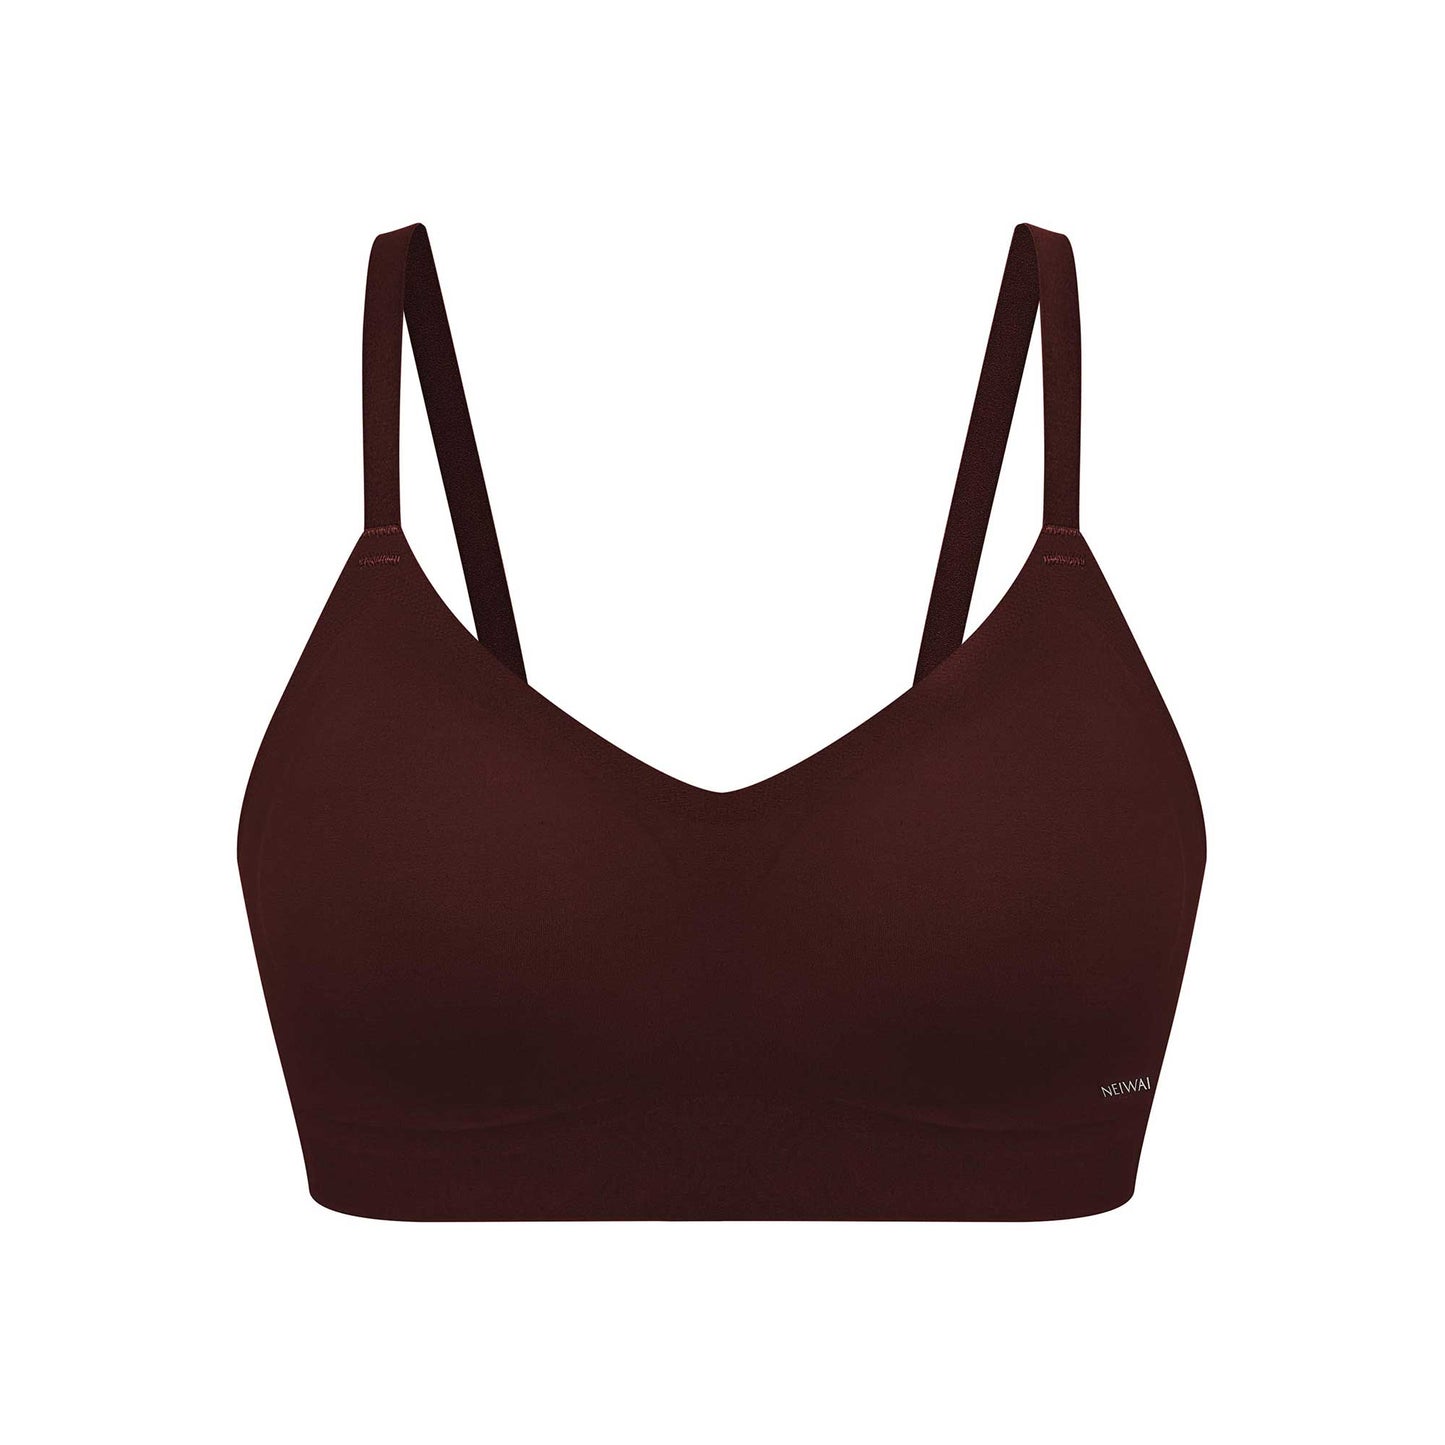 image of a brown bra